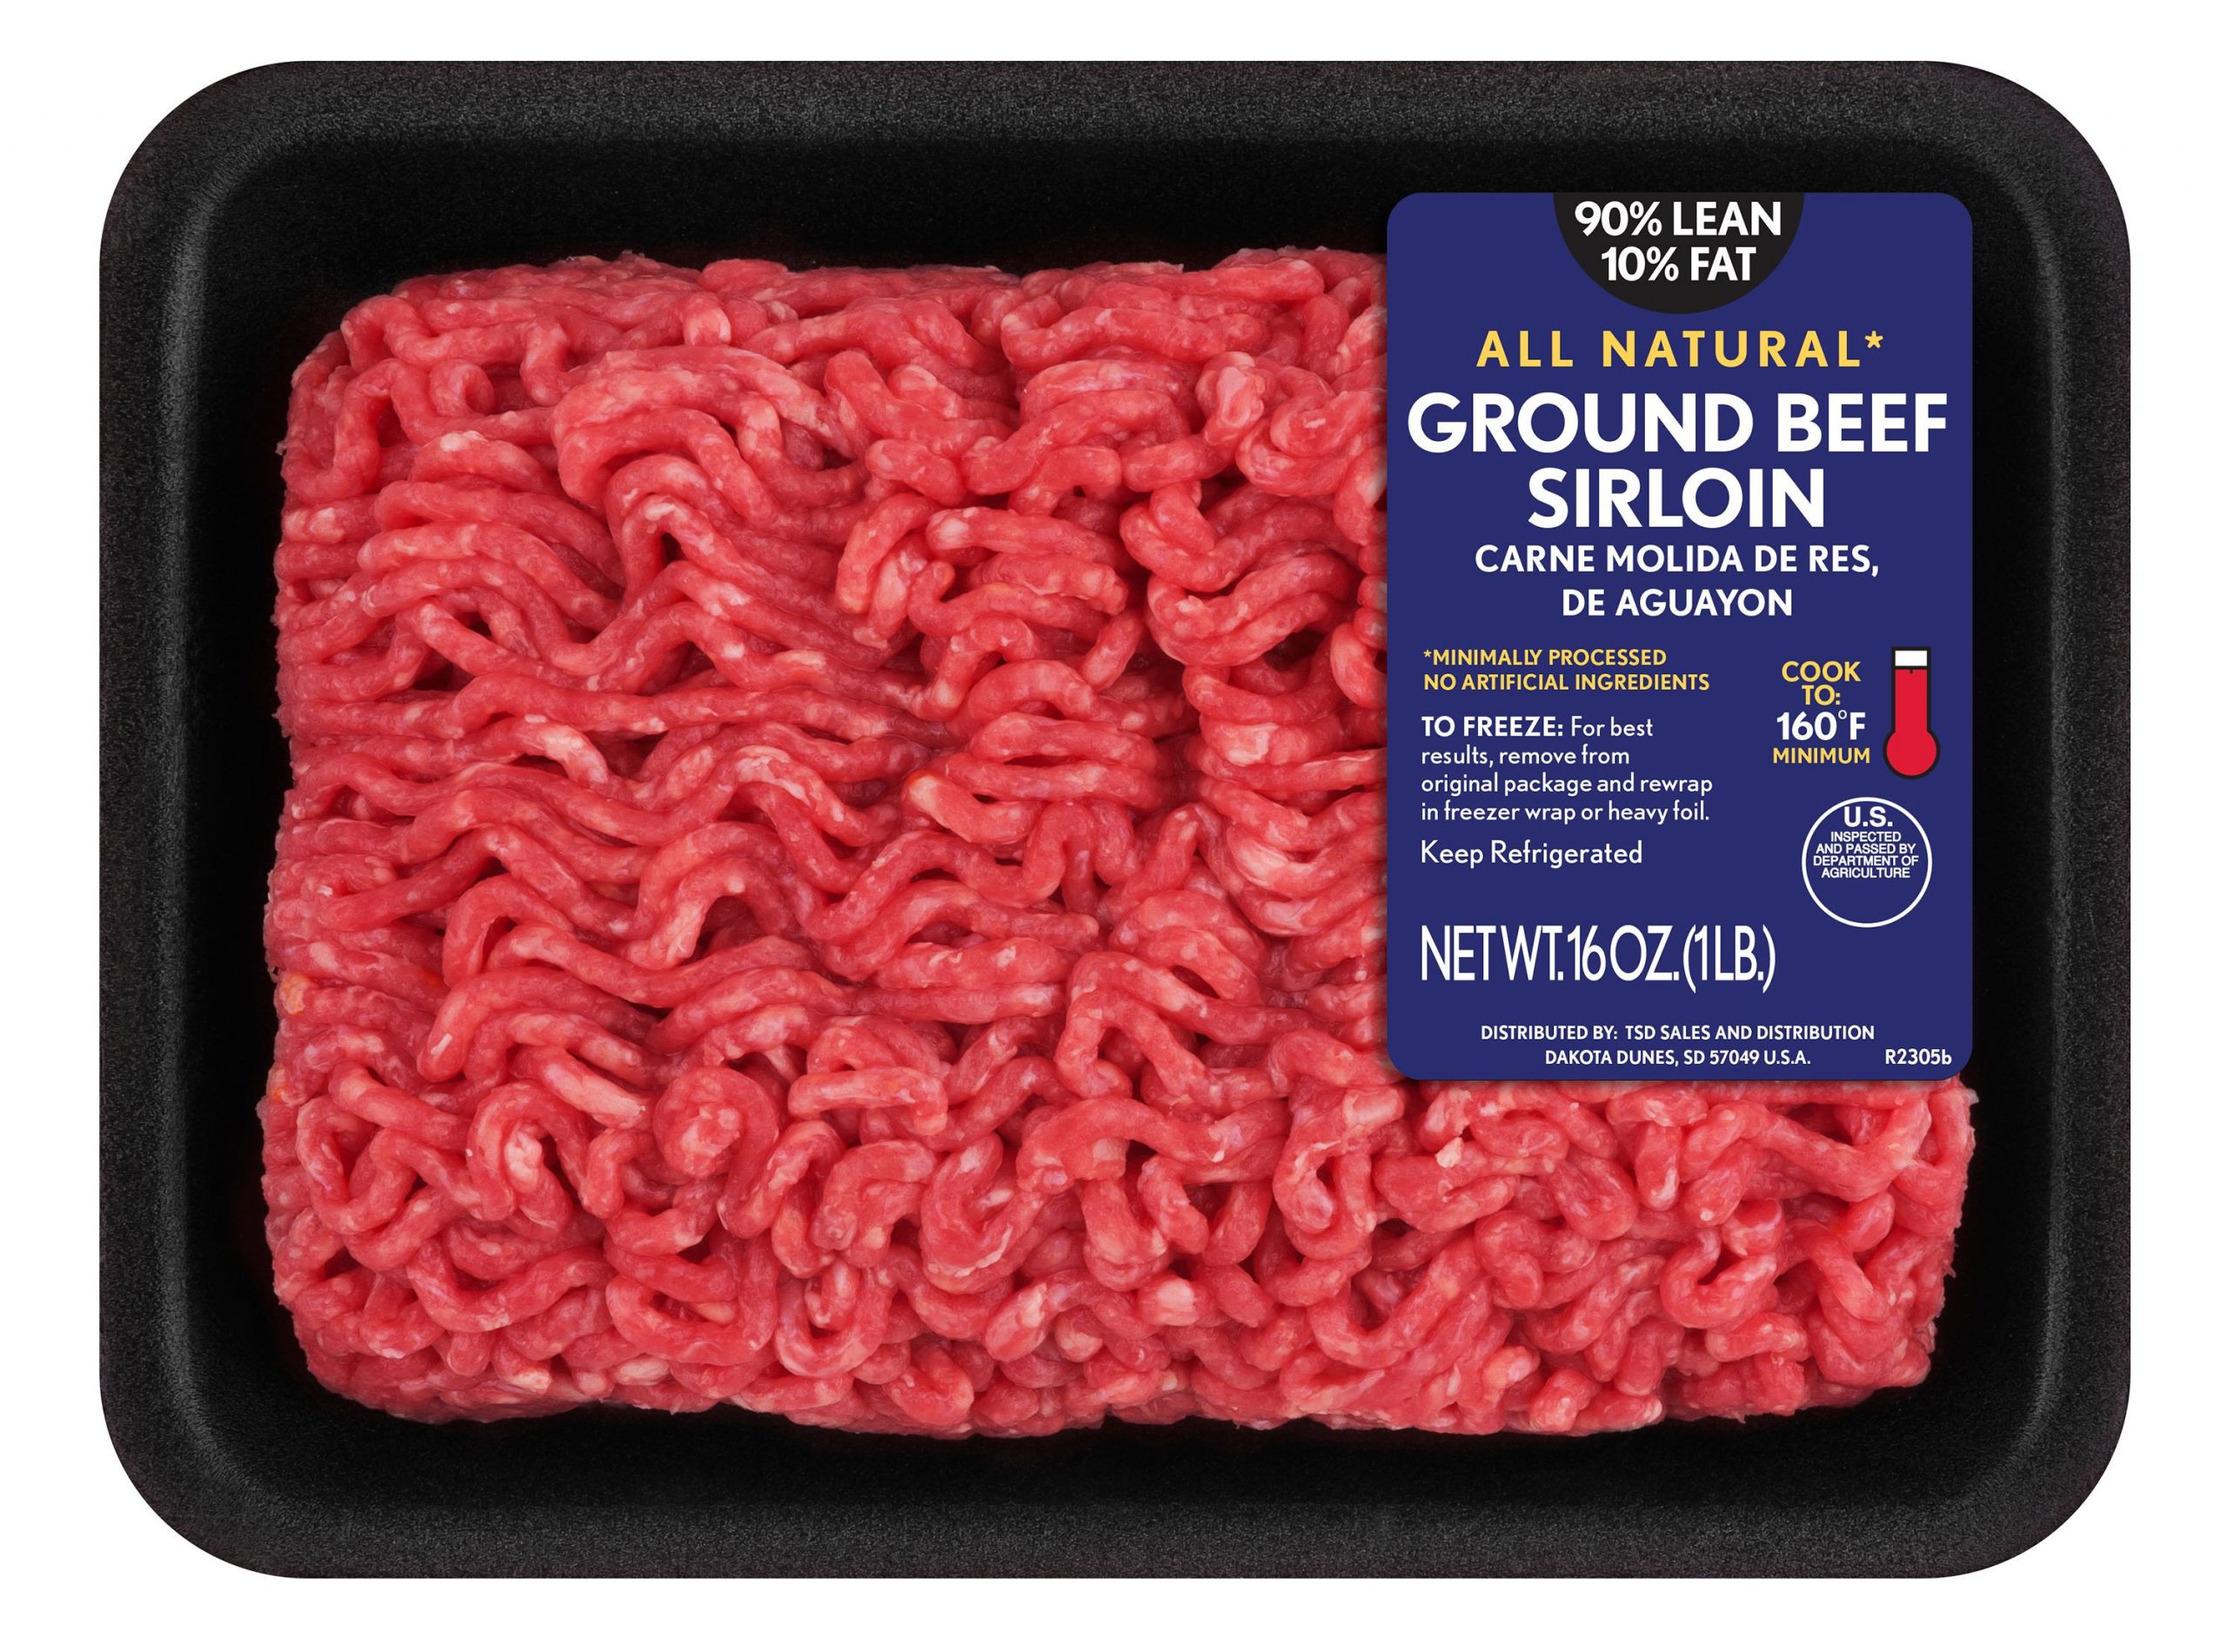 Ground Beef Sirloin Elegant All Natural Lean Fat Ground Beef Sirloin Tray 1